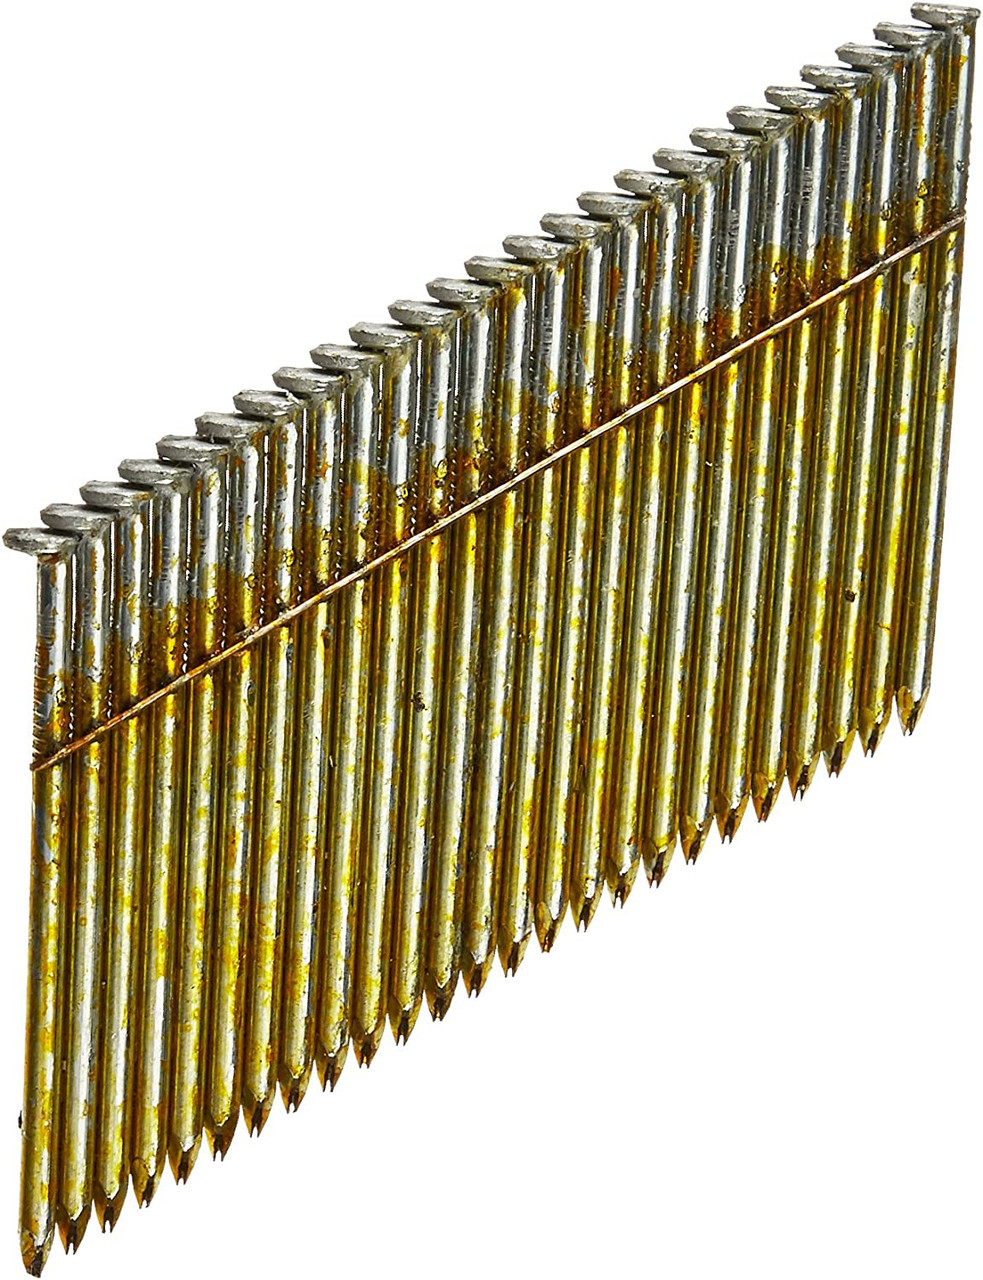 Therwen Framing Nails, 21 Degree, Flat D Head, Galvanized, Ring Shank,  Plastic Row Fixed, 21 Degree Framing Nails for Use in All Pressure Treated  Lumber (1000 Count,3-1/2 Inch X 0.131 Inch) - Amazon.com